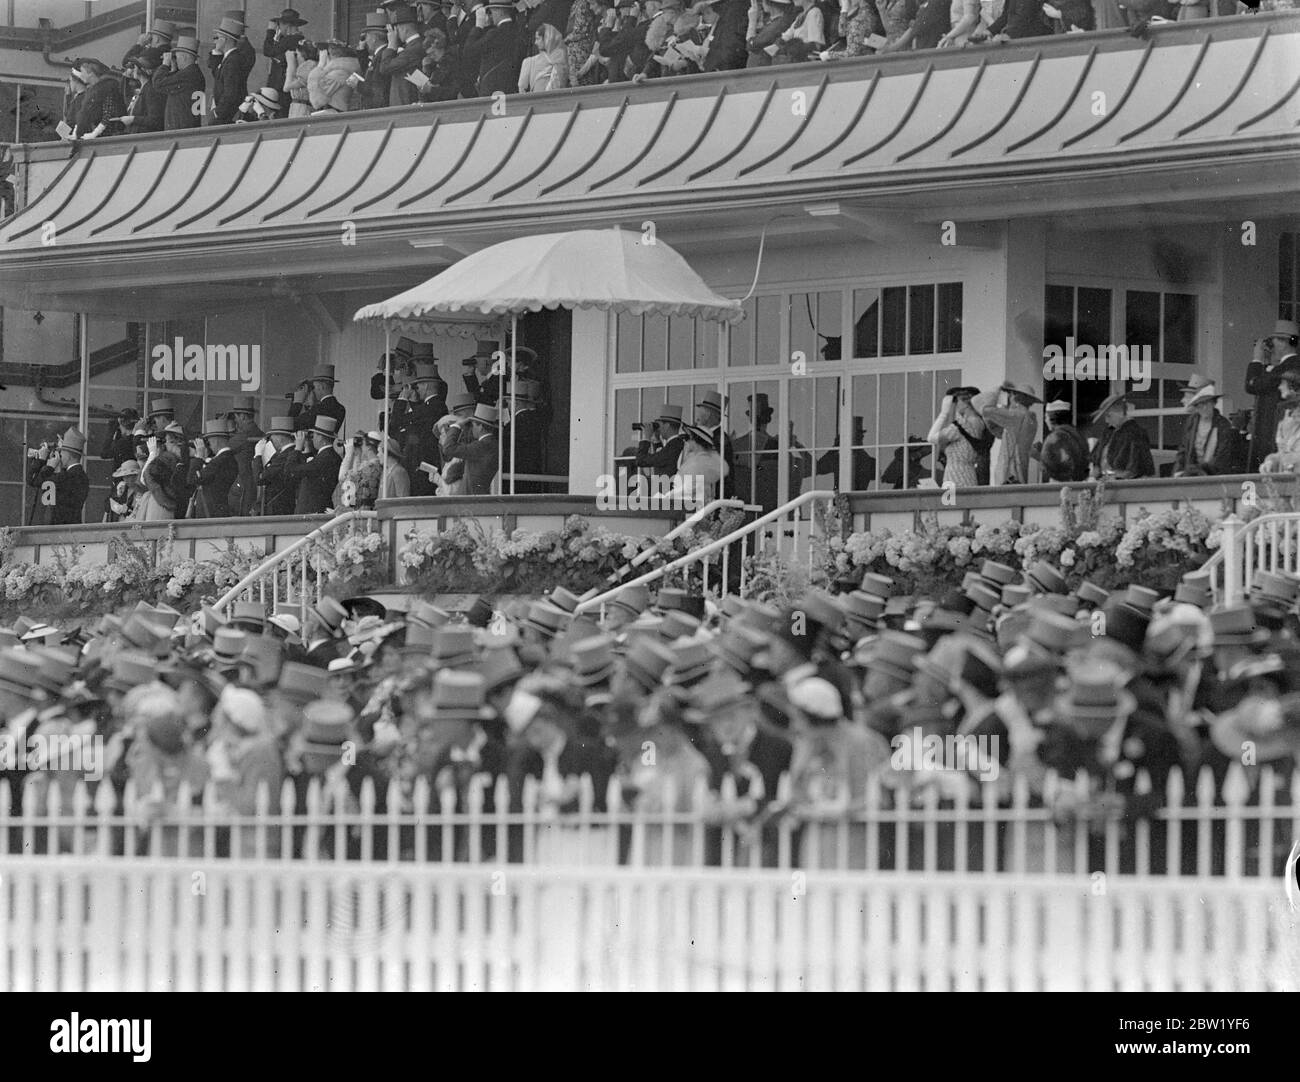 King and Queen as Royal party at Ascot. The King and Queen, accompanied by other members of the Royal family. Attending the opening meeting at Ascot. Photo shows, the King and Queen watching the racing from the Royal Box at Ascot. 15 June 1937 Stock Photo